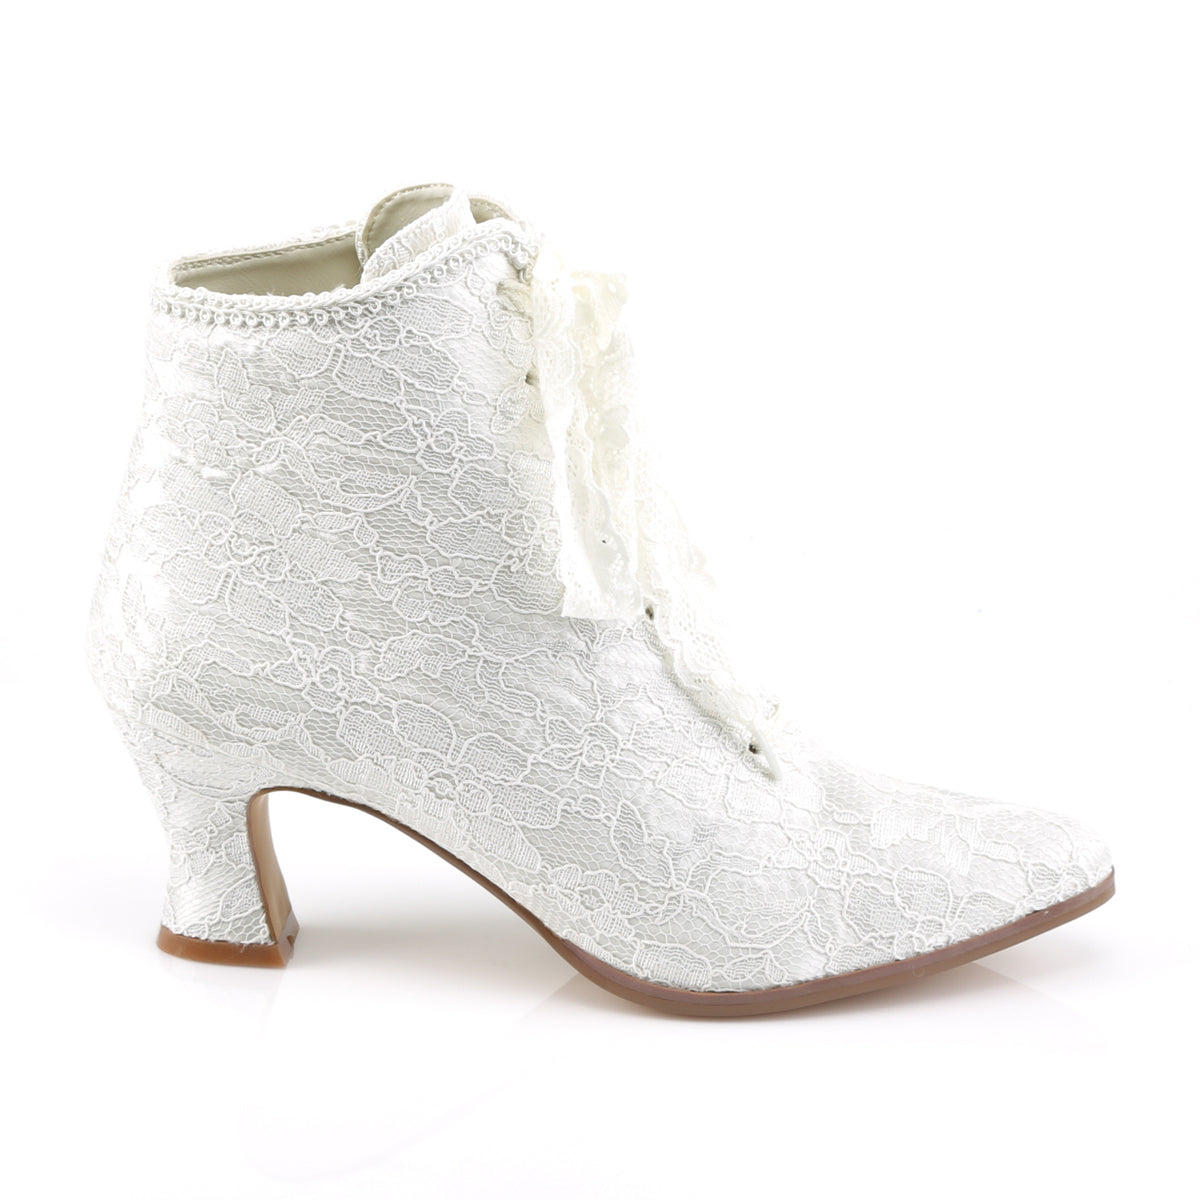 VICTORIAN-30 Fabulicious 3 Inch Heel Ivory Satin Boots-Fabulicious- Sexy Shoes Fetish Heels